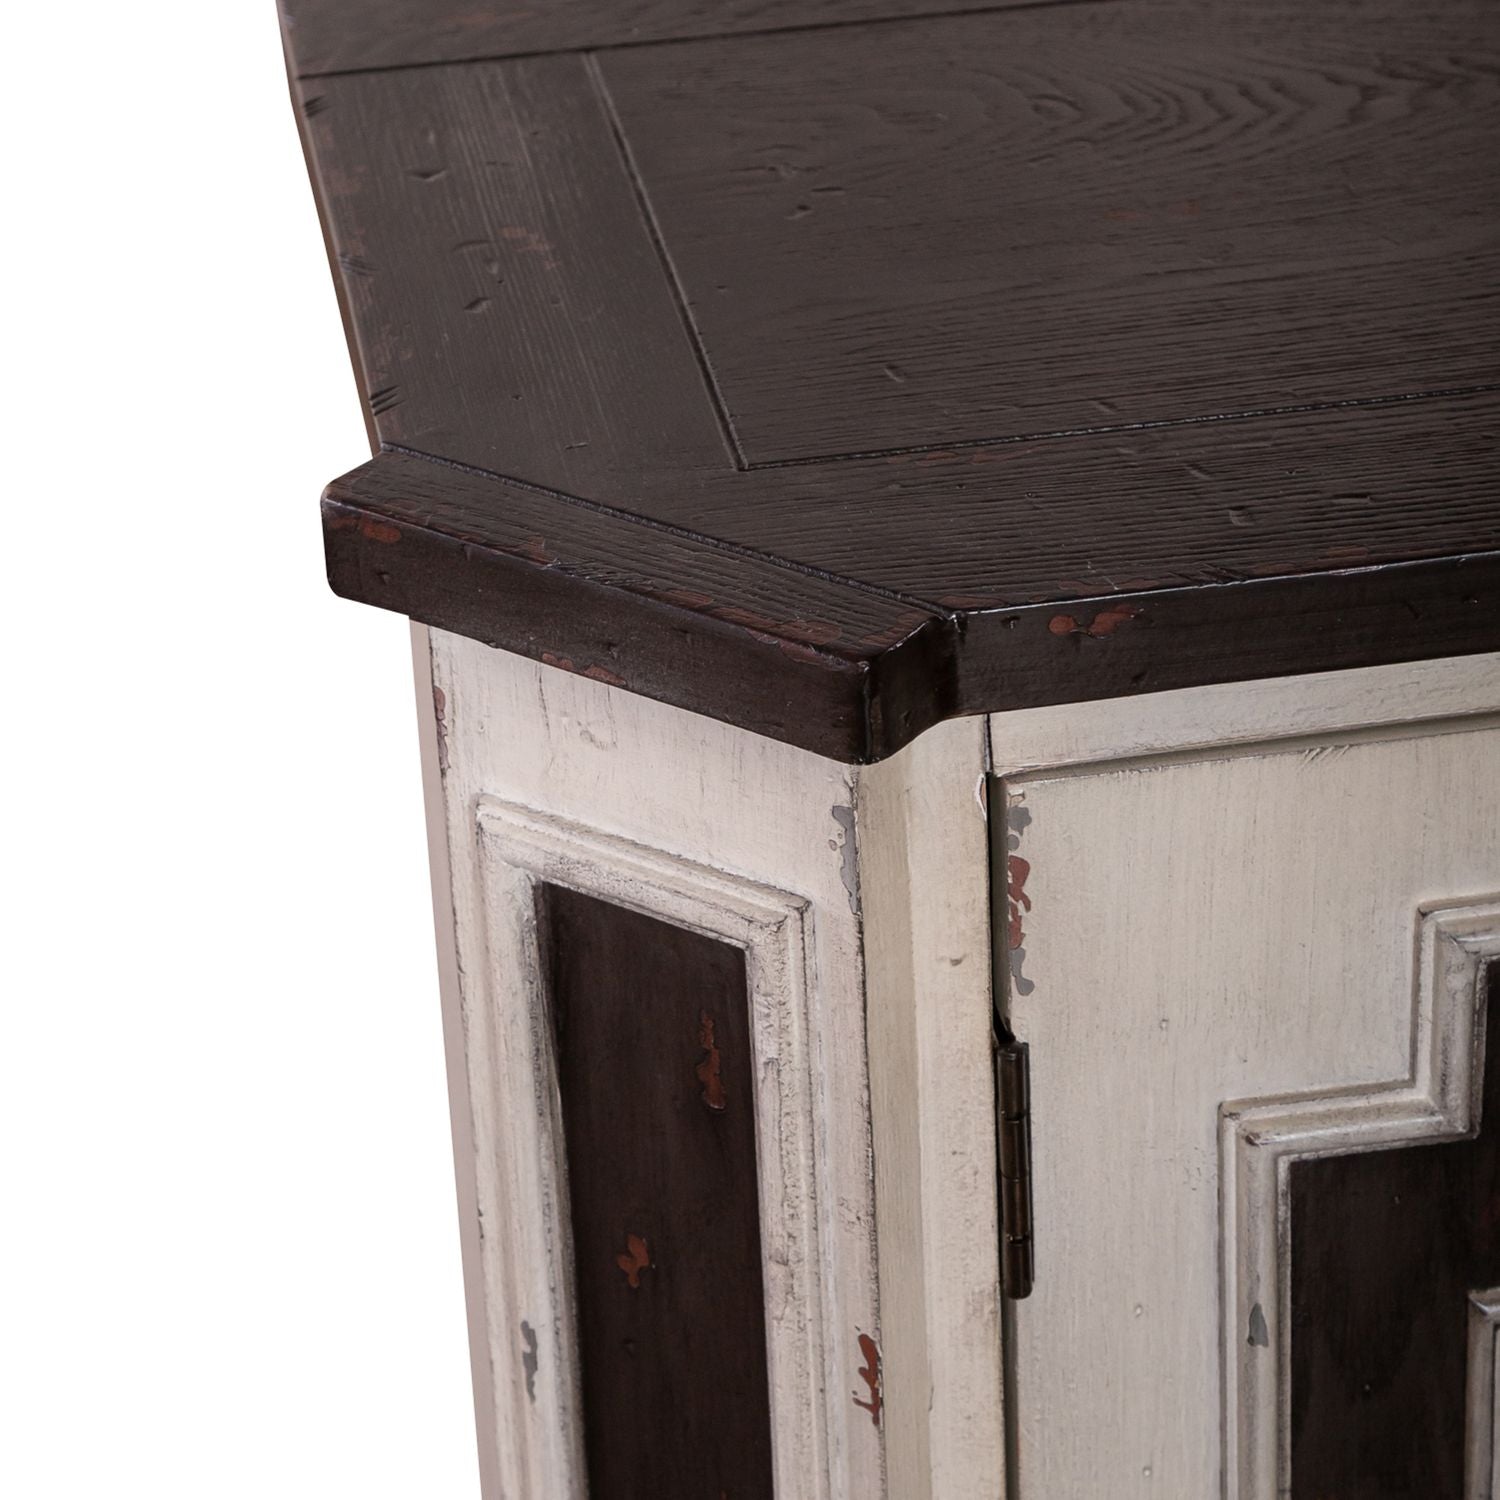 Dulcey 4 Door Accent Cabinet